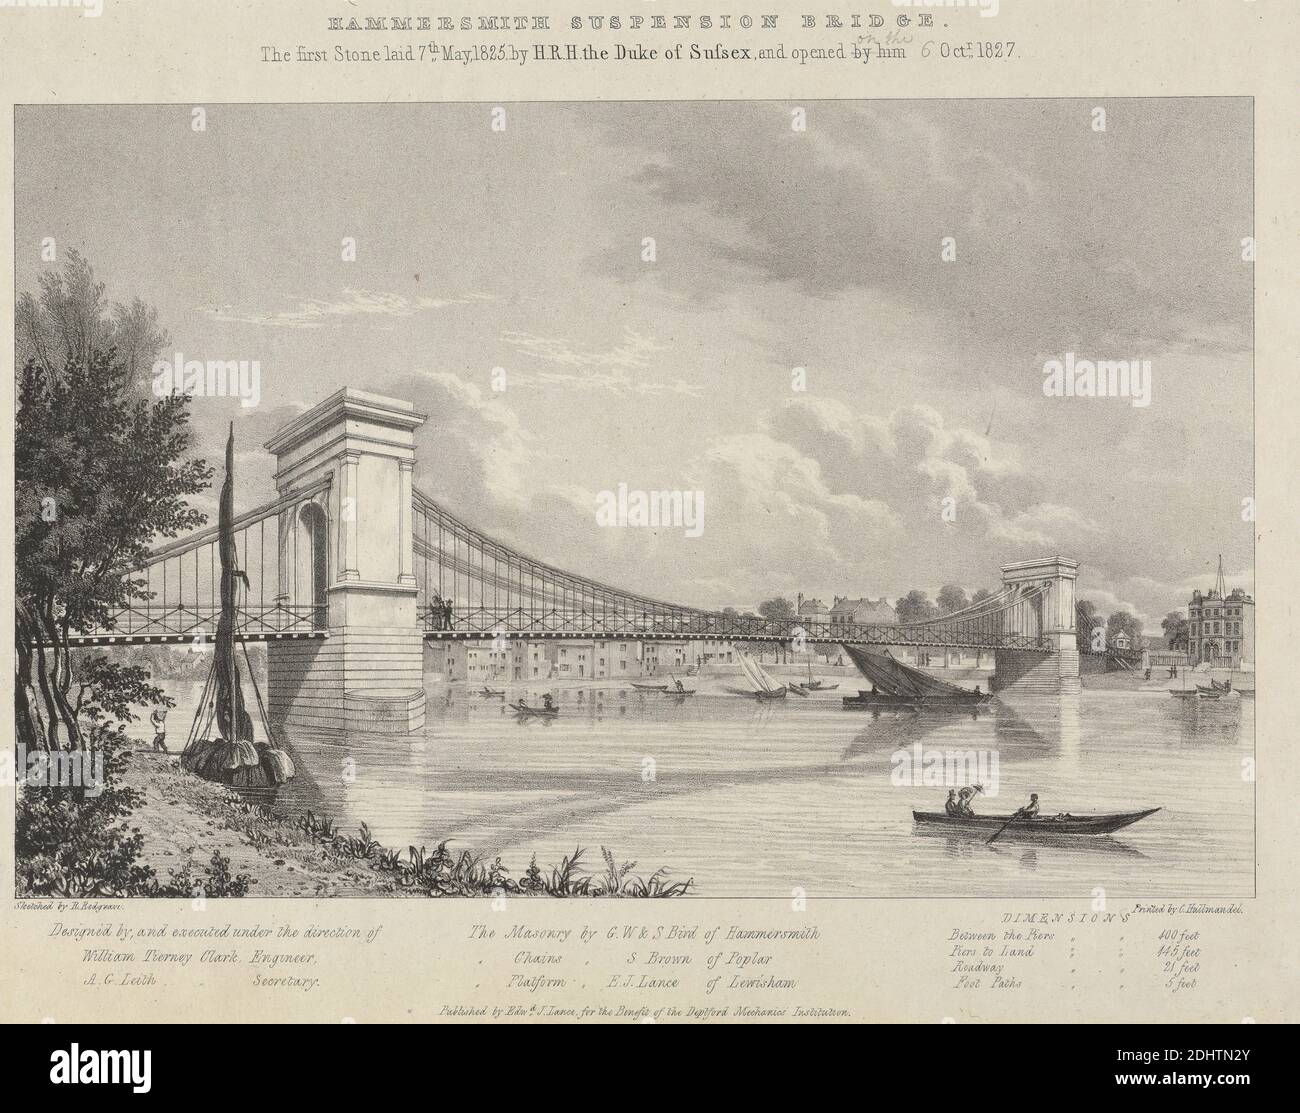 Hammersmith Suspension Bridge, The first Stone laid 7th May, 1825 by H.R.H. the Duke of Sussex, and opened by him,   Oct. 1827, Charles J. Hullmandel, 1789–1850, British, after Richard Redgrave, 1804–1888, British, 1827, Lithograph Stock Photo